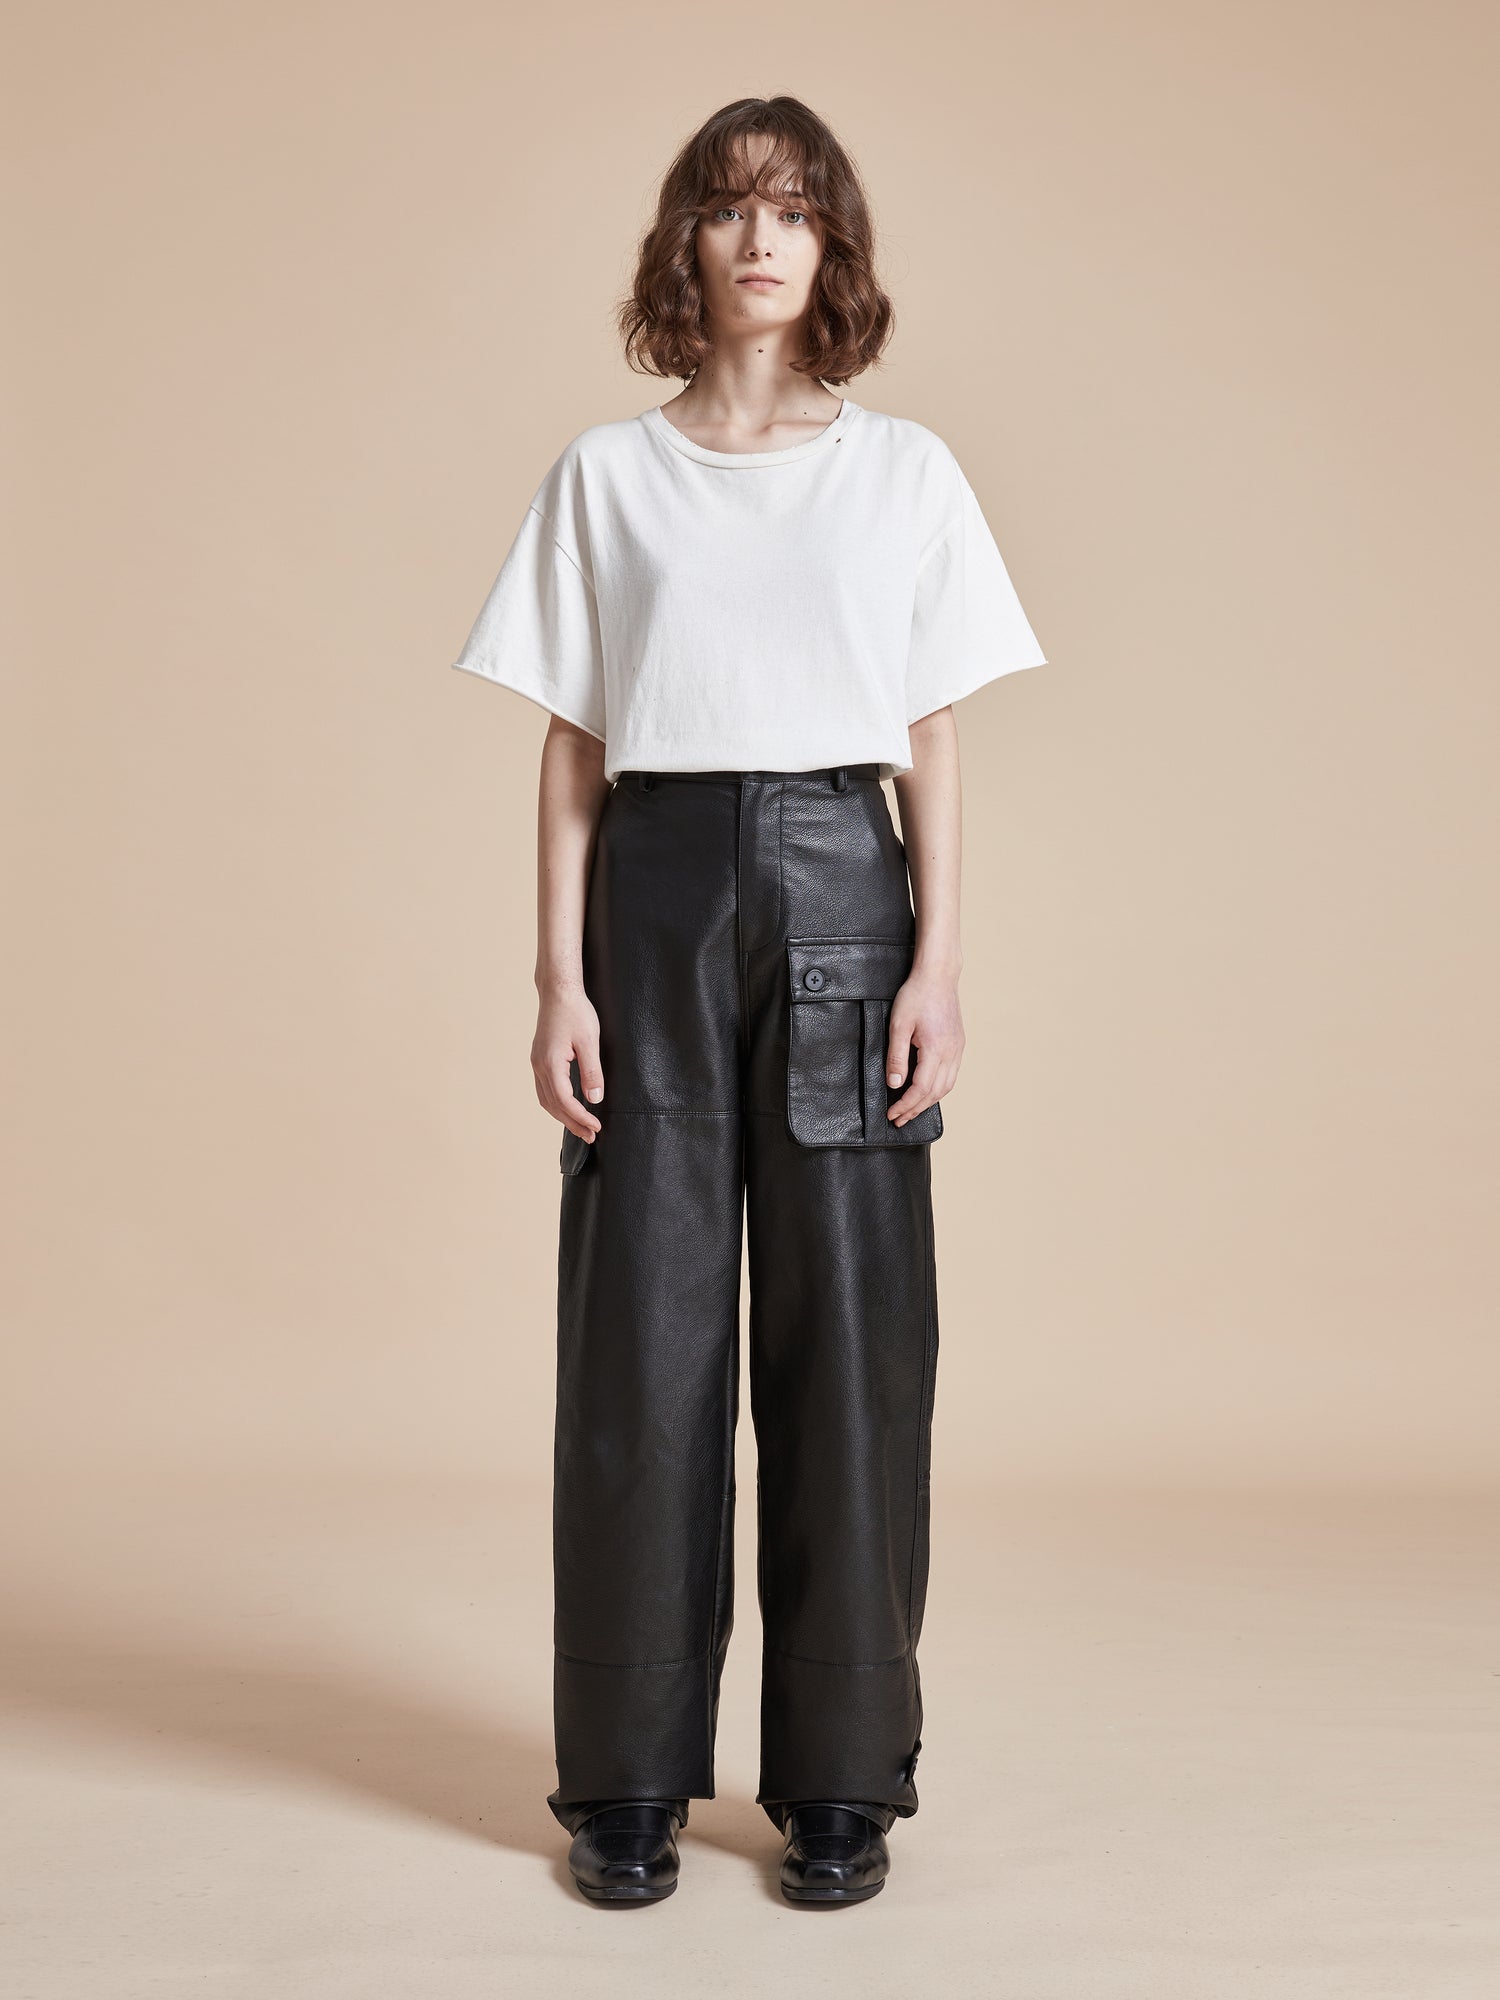 A model wearing Found Faux Leather Cargo Pants and a white t-shirt.